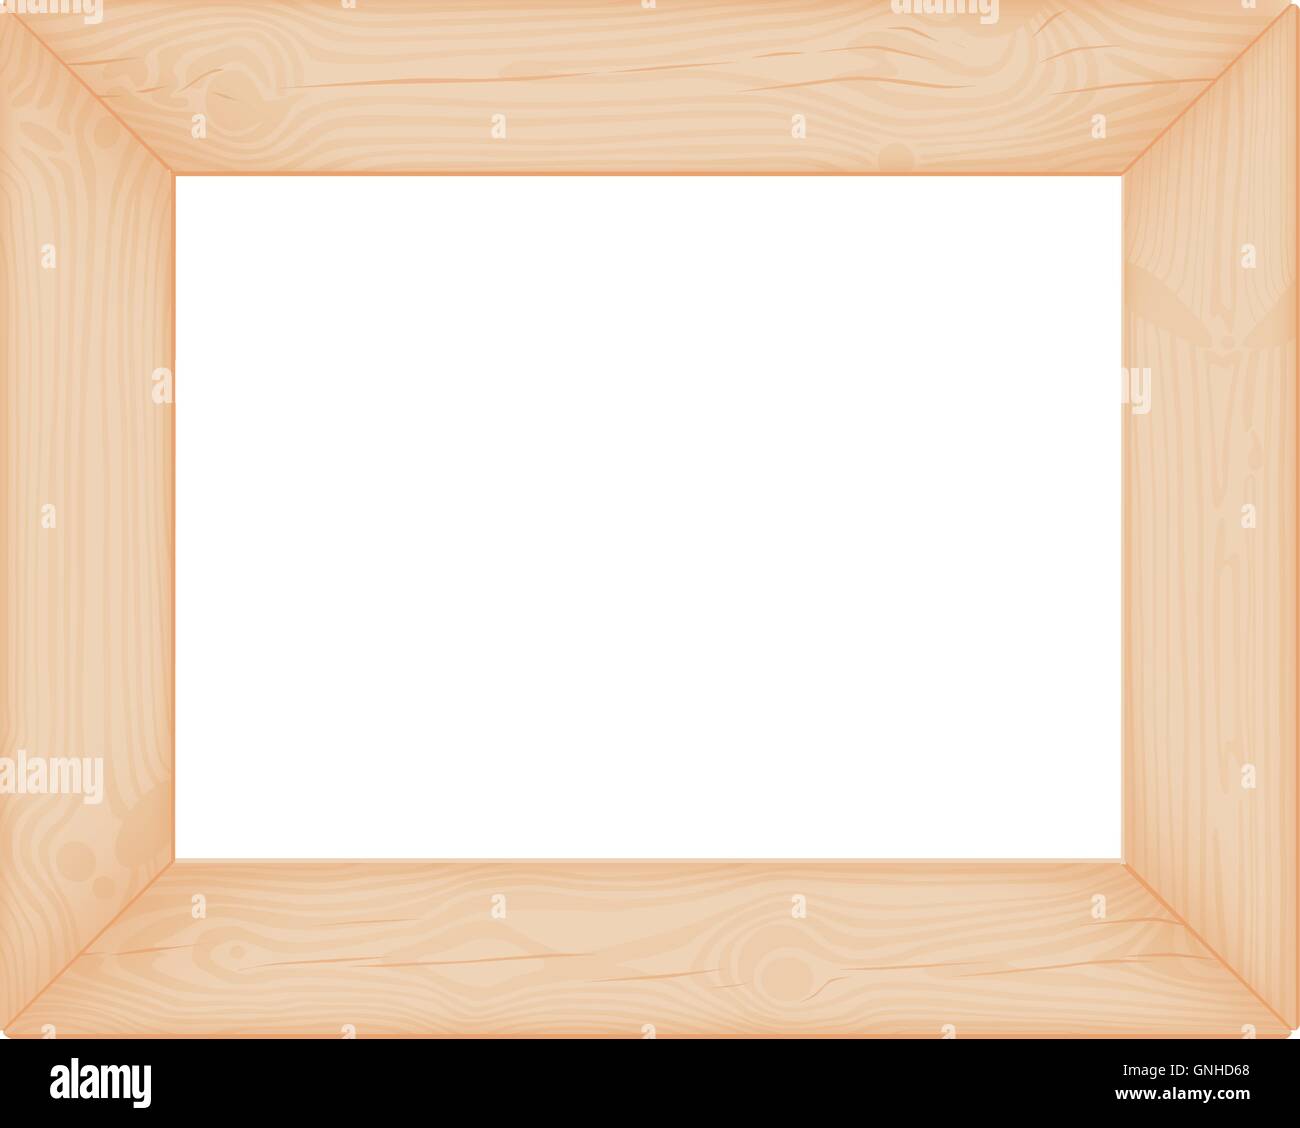 Natural textured wooden rectangular frame with knots and cracks vector illustration Stock Vector